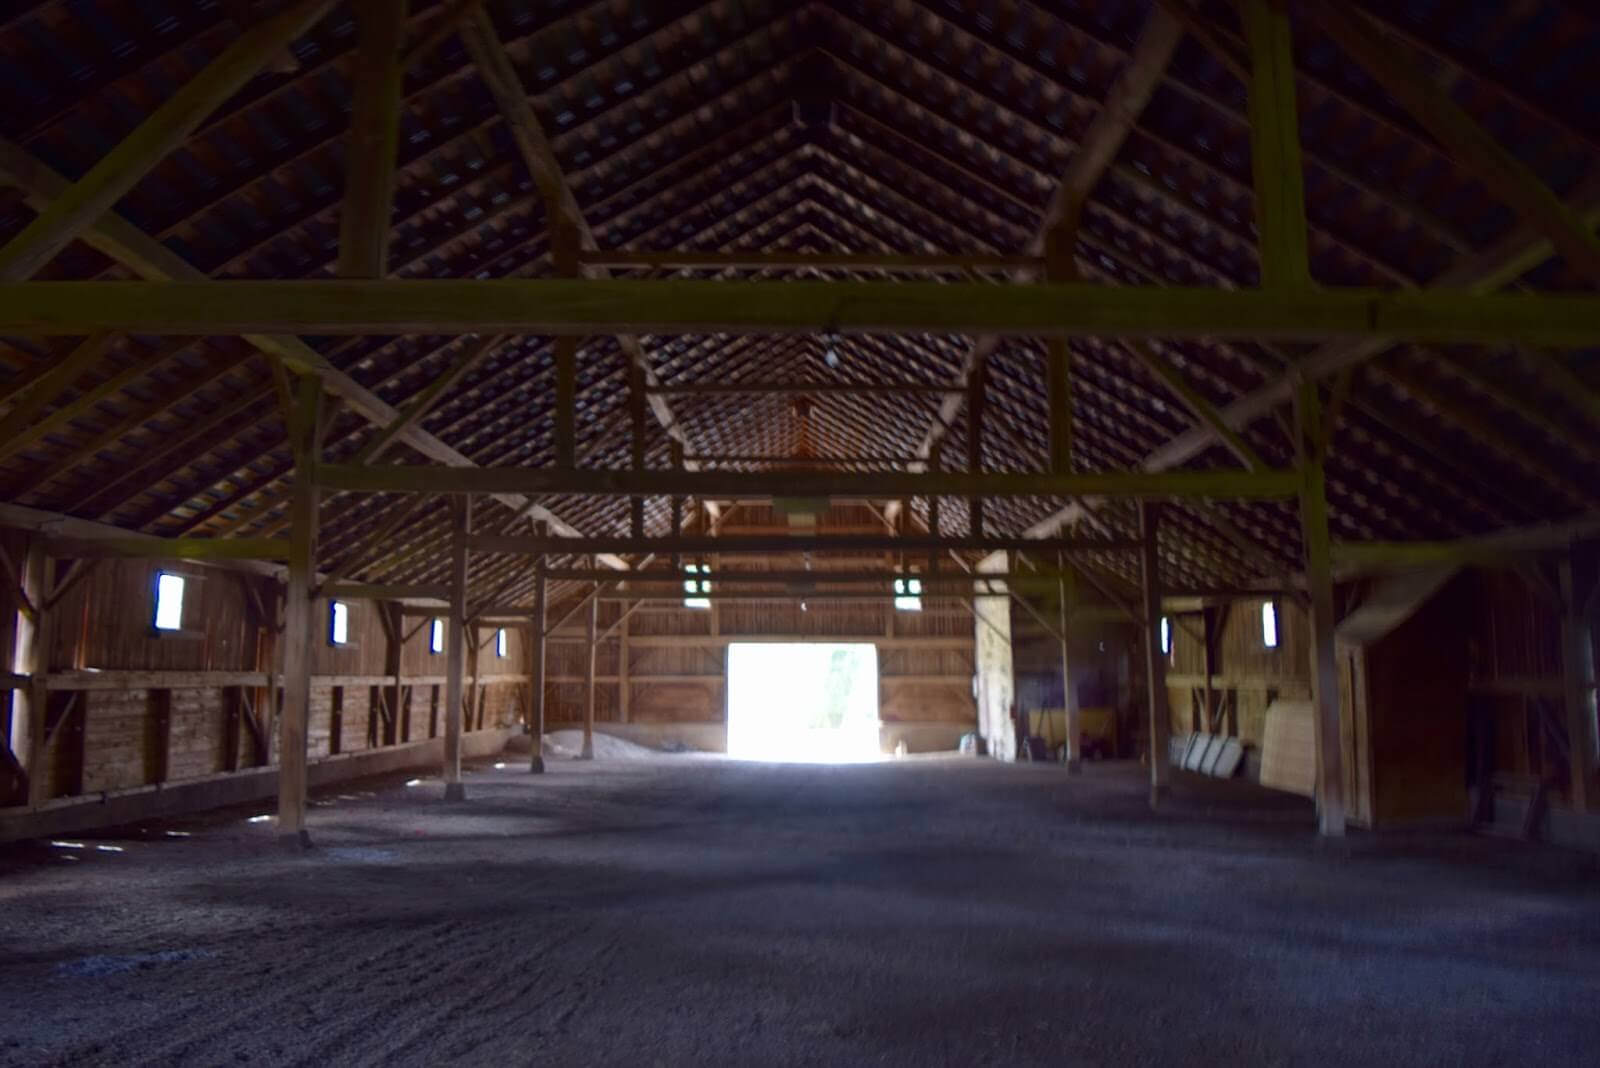 The inside of a buggy barn.